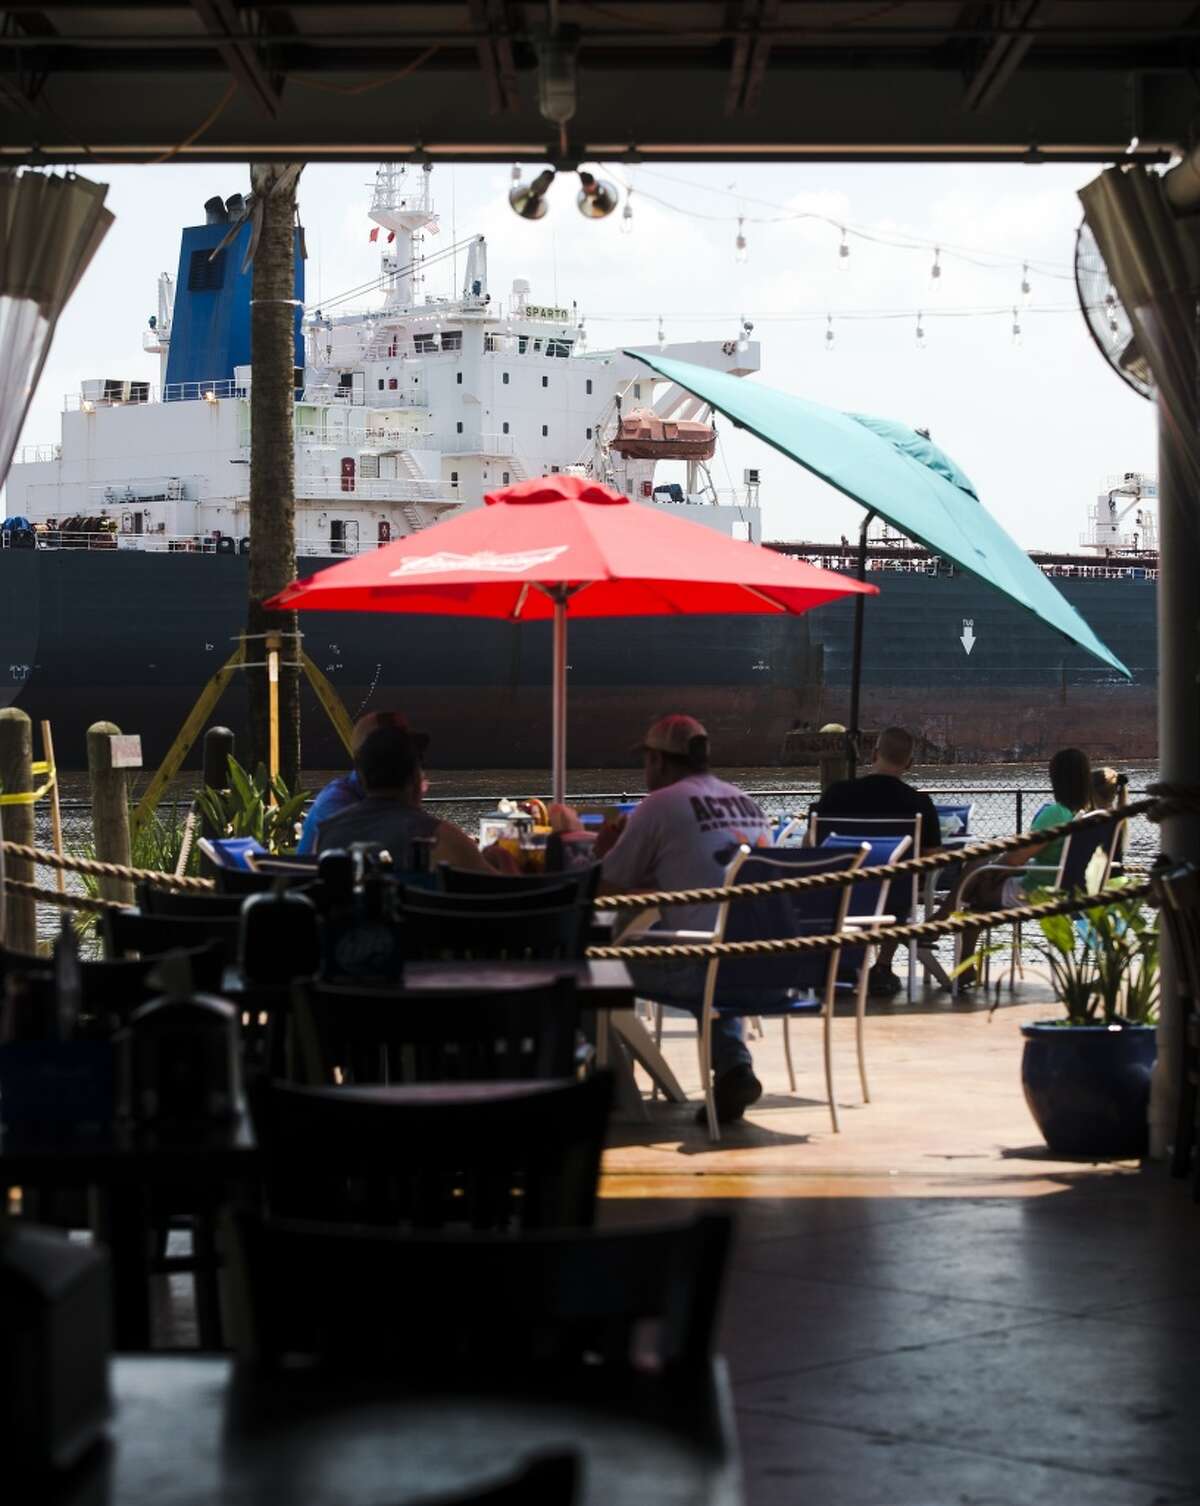 People enjoy a brunch at the Neches River Wheelhouse as a large ship passes by on the river Saturday morning. The Neches River Wheelhouse serves brunch on Saturday and Sunday from 10 a.m. to 2 p.m. and offers brunch seating in their new Paiapa outdoor section. Photo taken Saturday 6/6/15 Jake Daniels/The Enterprise